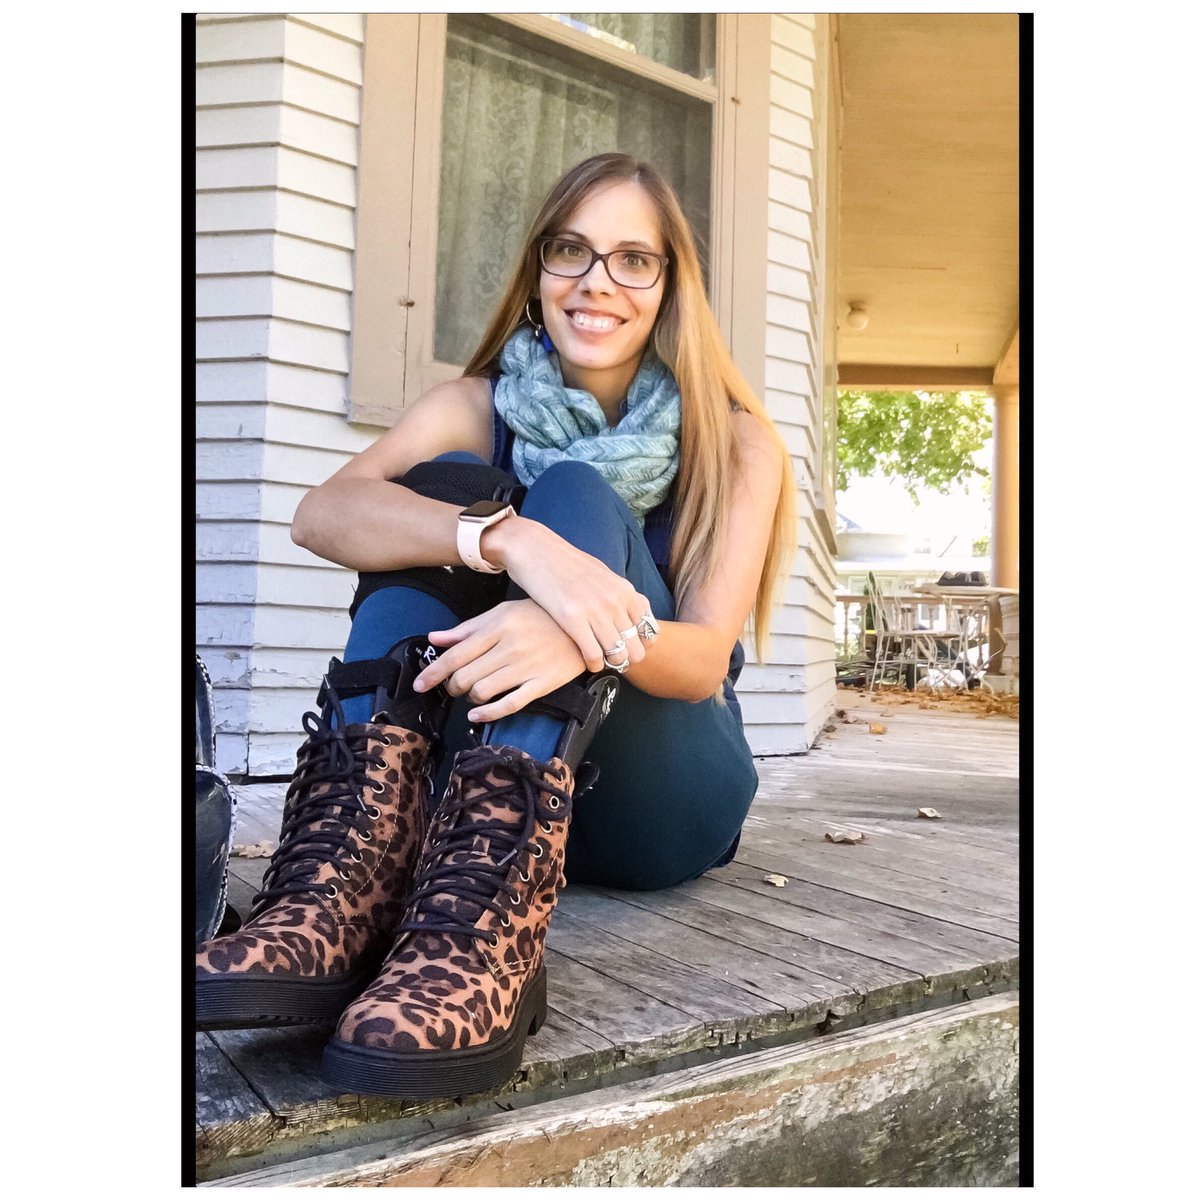 Confidence. And a beautiful fall day. #epilepsy #ehlersdanlos #pots #centralline #gtube #leopardboots #afoshoes #fall #model #modelling #disabelled #fashion #beauty #modellife #lovinglife #tpndependent #liveyourlife